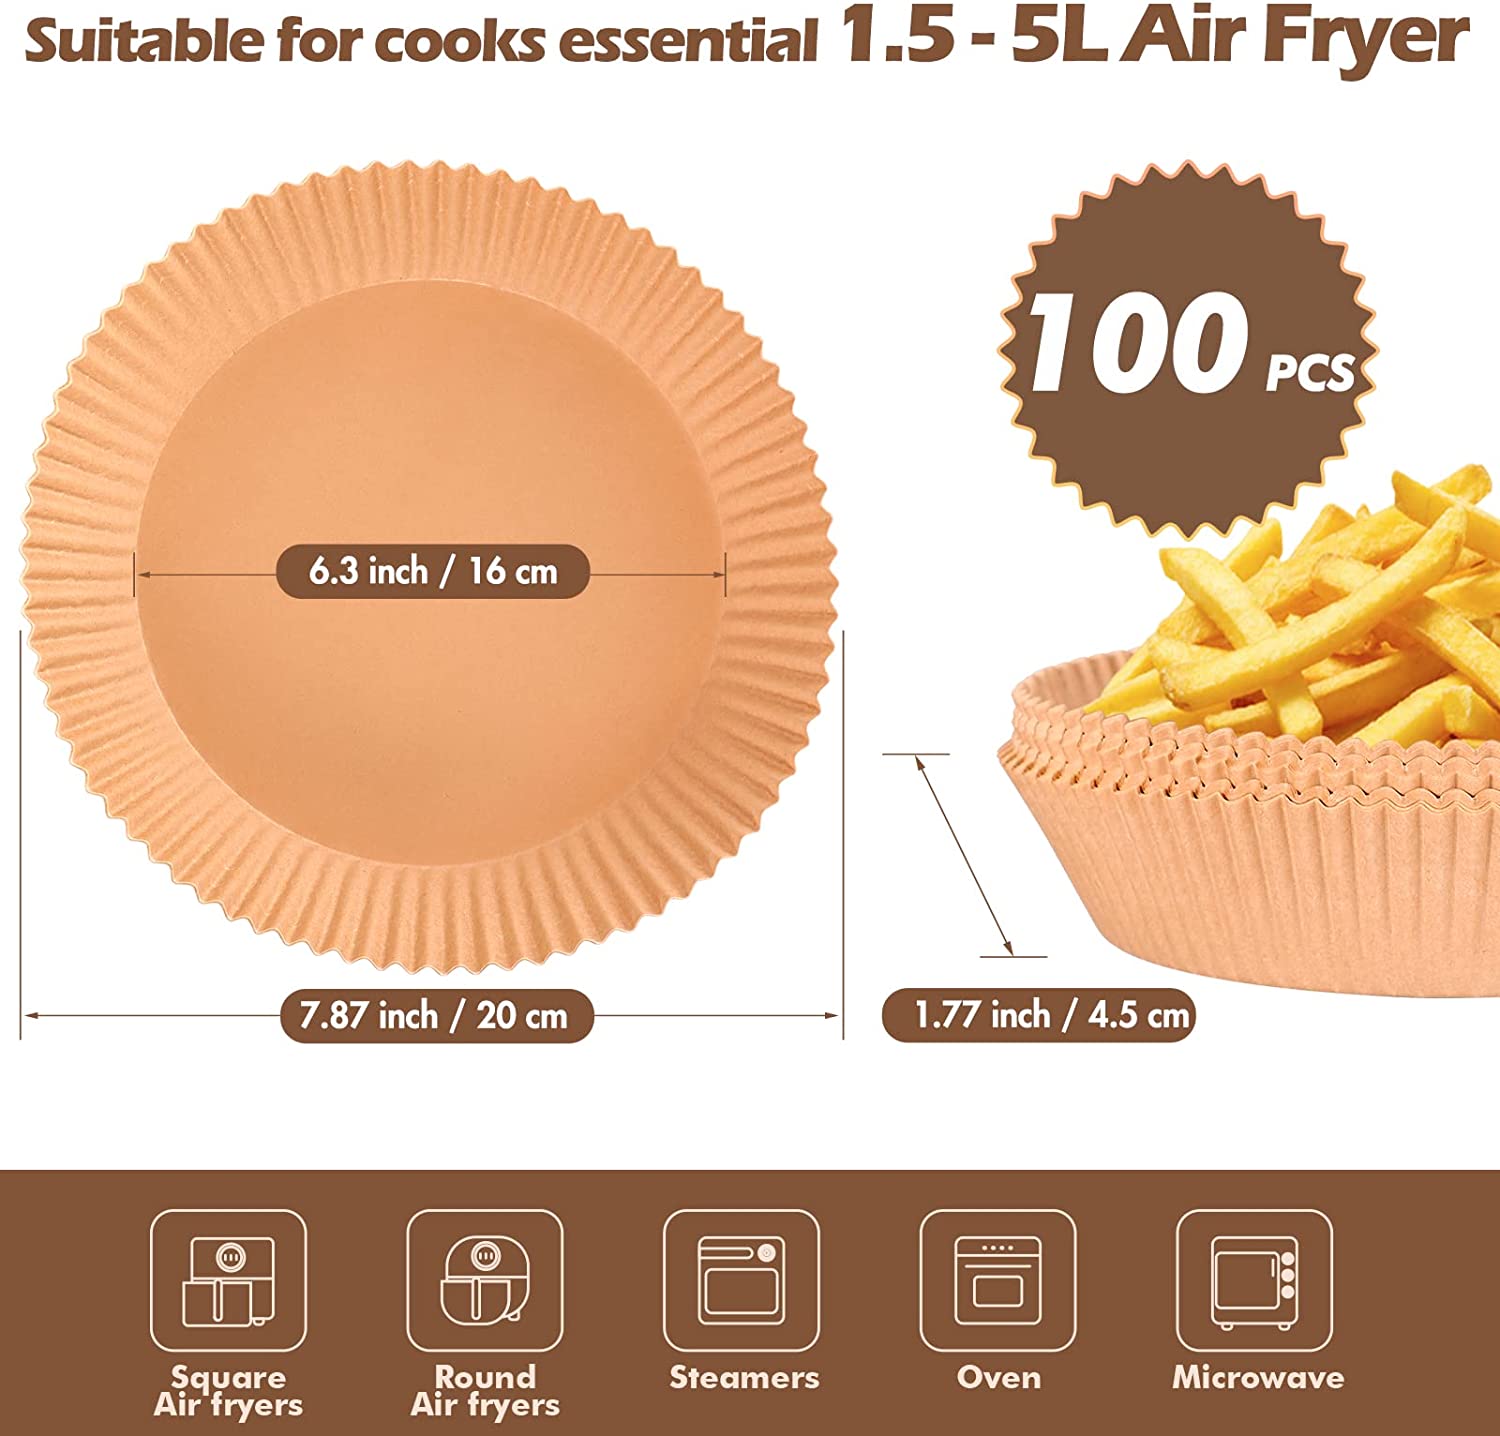 100 Sheets Square Air Fryer Baking Paper Silicone Oil Paper Bun